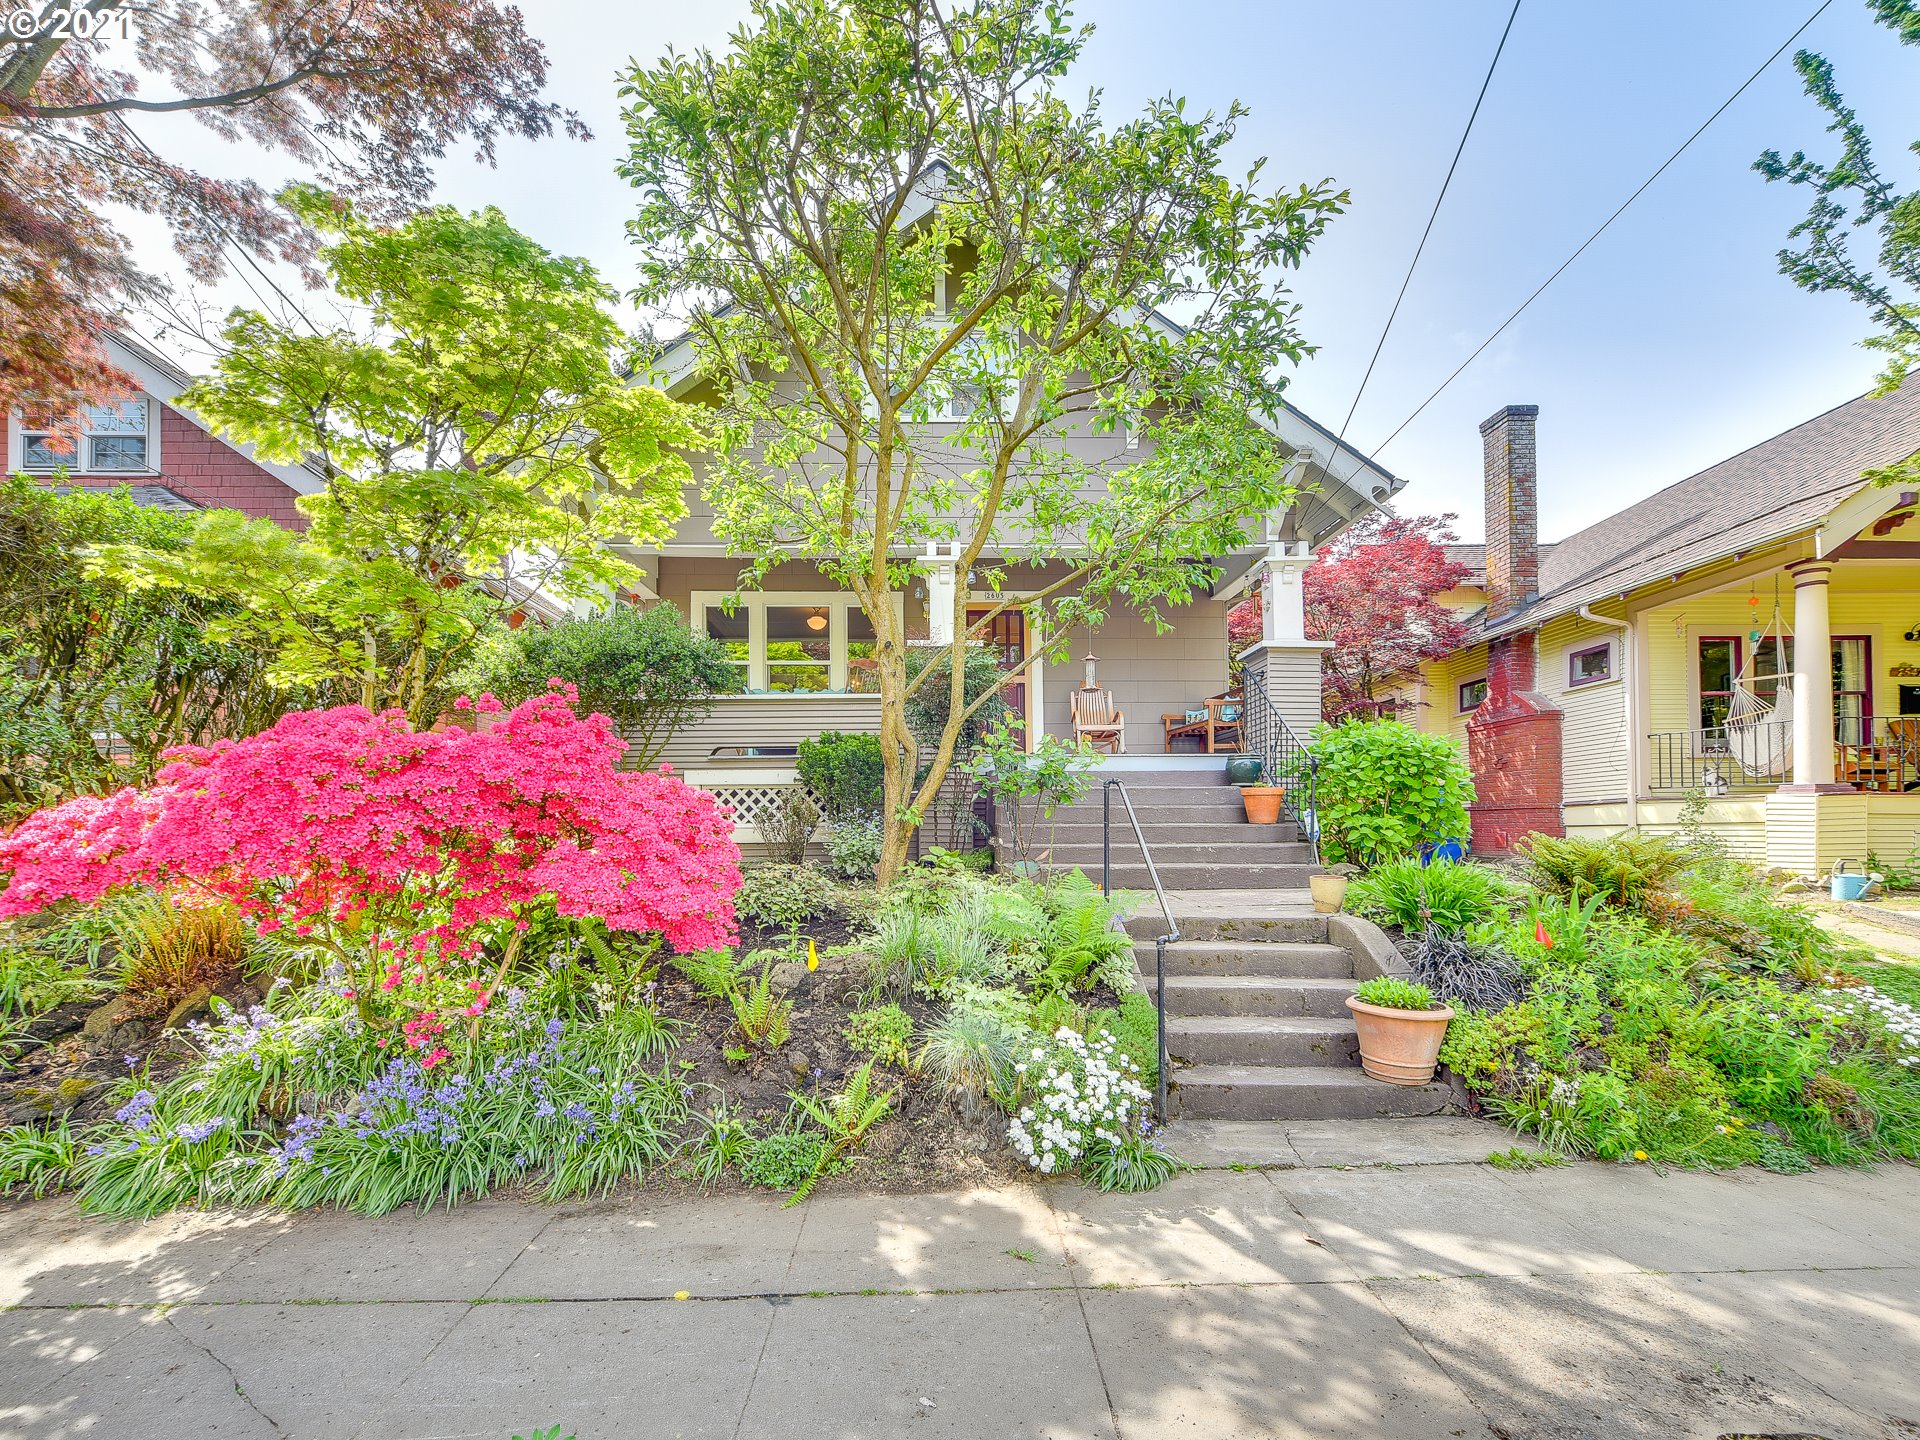 2605 SE 34TH AVE (1 of 29)